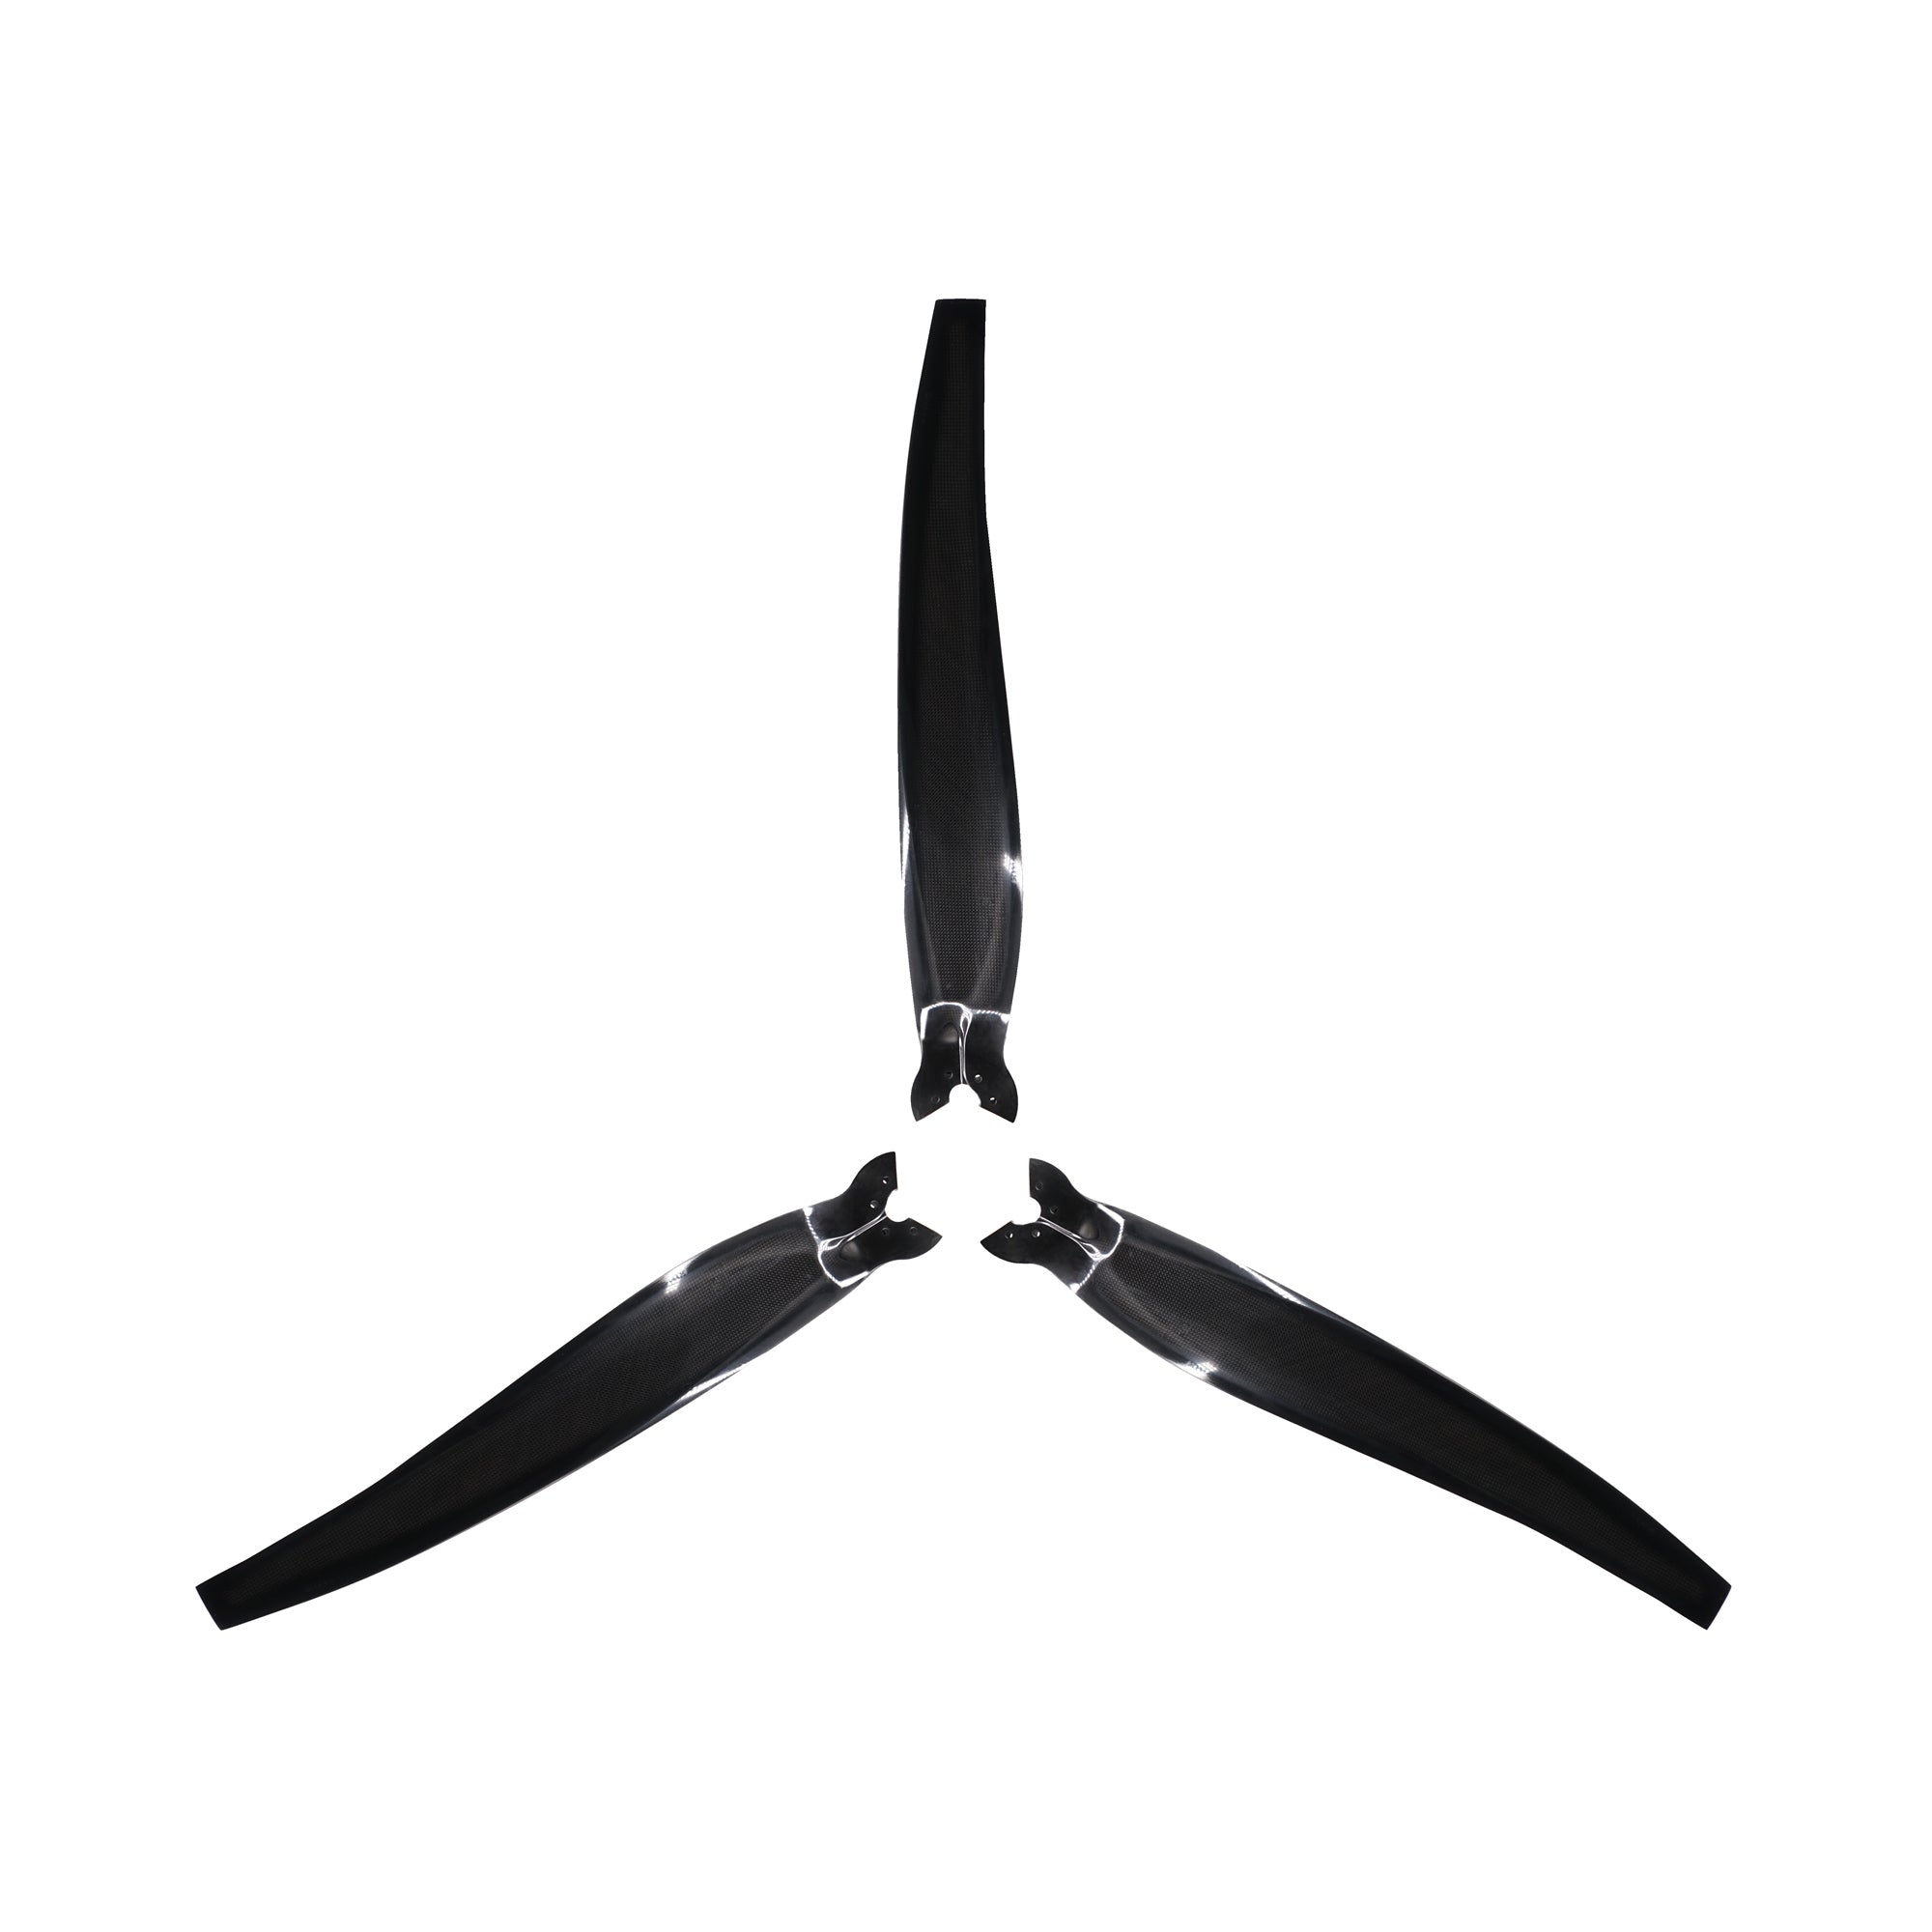 55 Inch 3-Blade CW CCW Carbon Fiber Propeller for 23850 BLDC Motor Heavy Lift Drone Motor